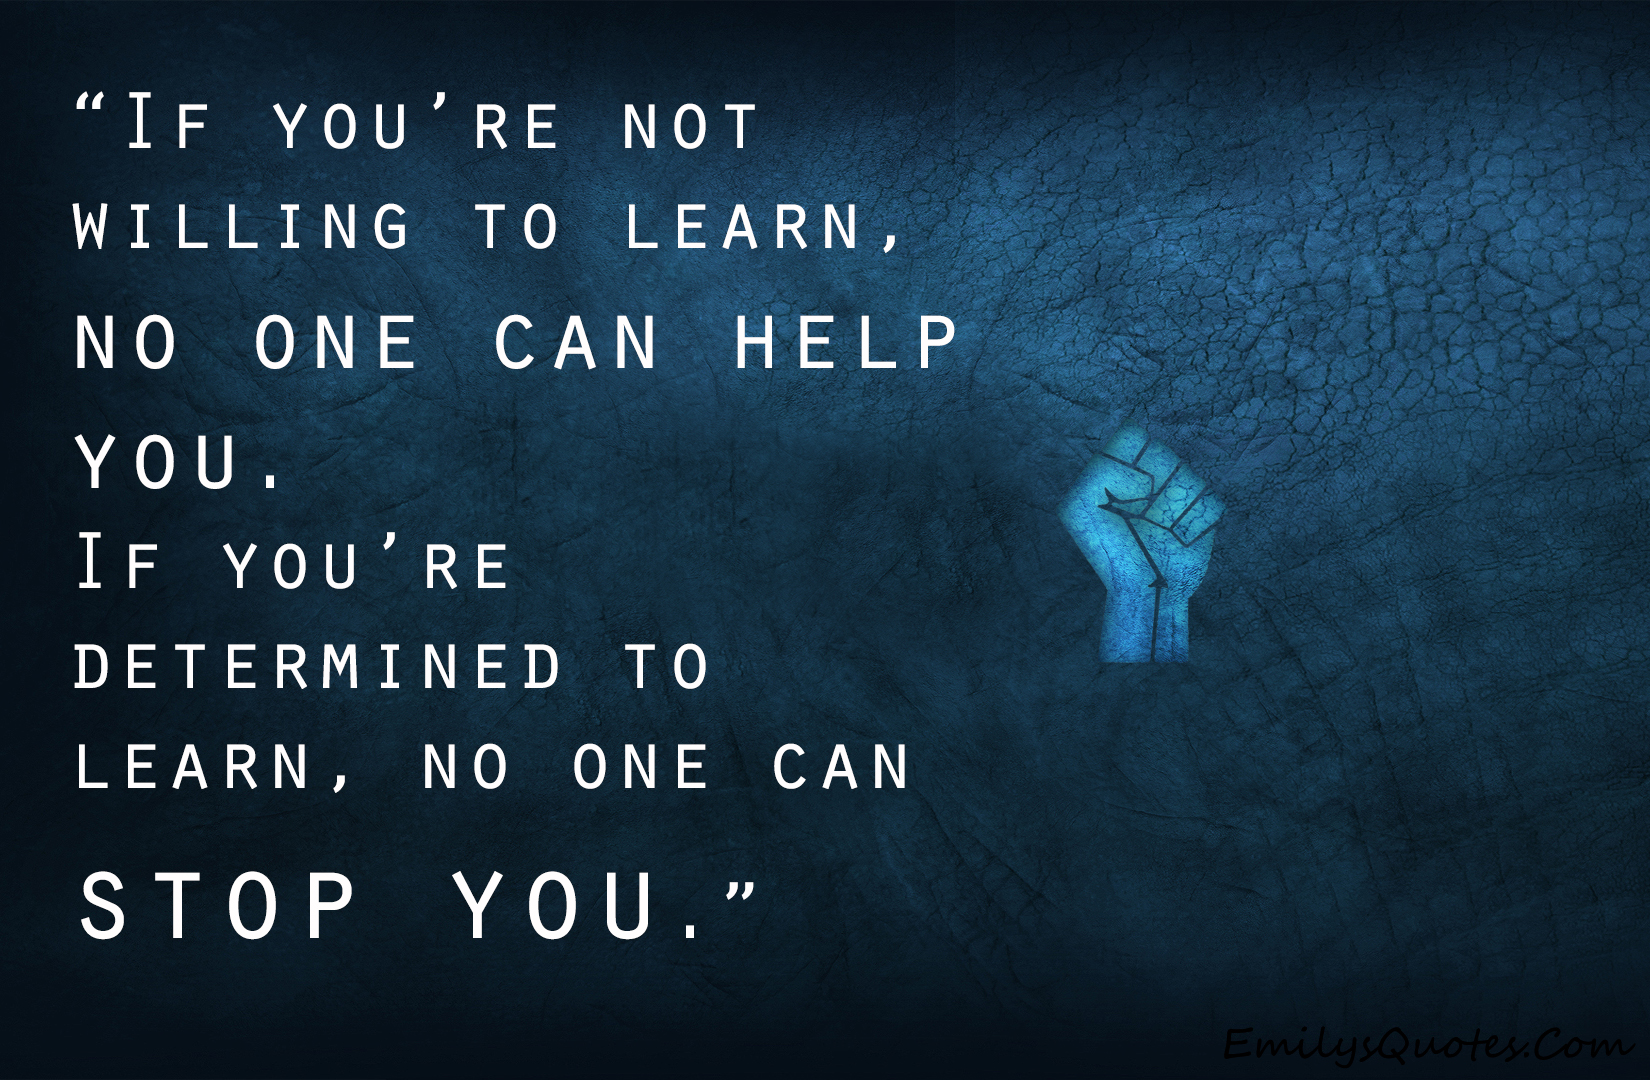 If you’re not willing to learn, no one can help you. If you’re determined to learn, no one can stop you